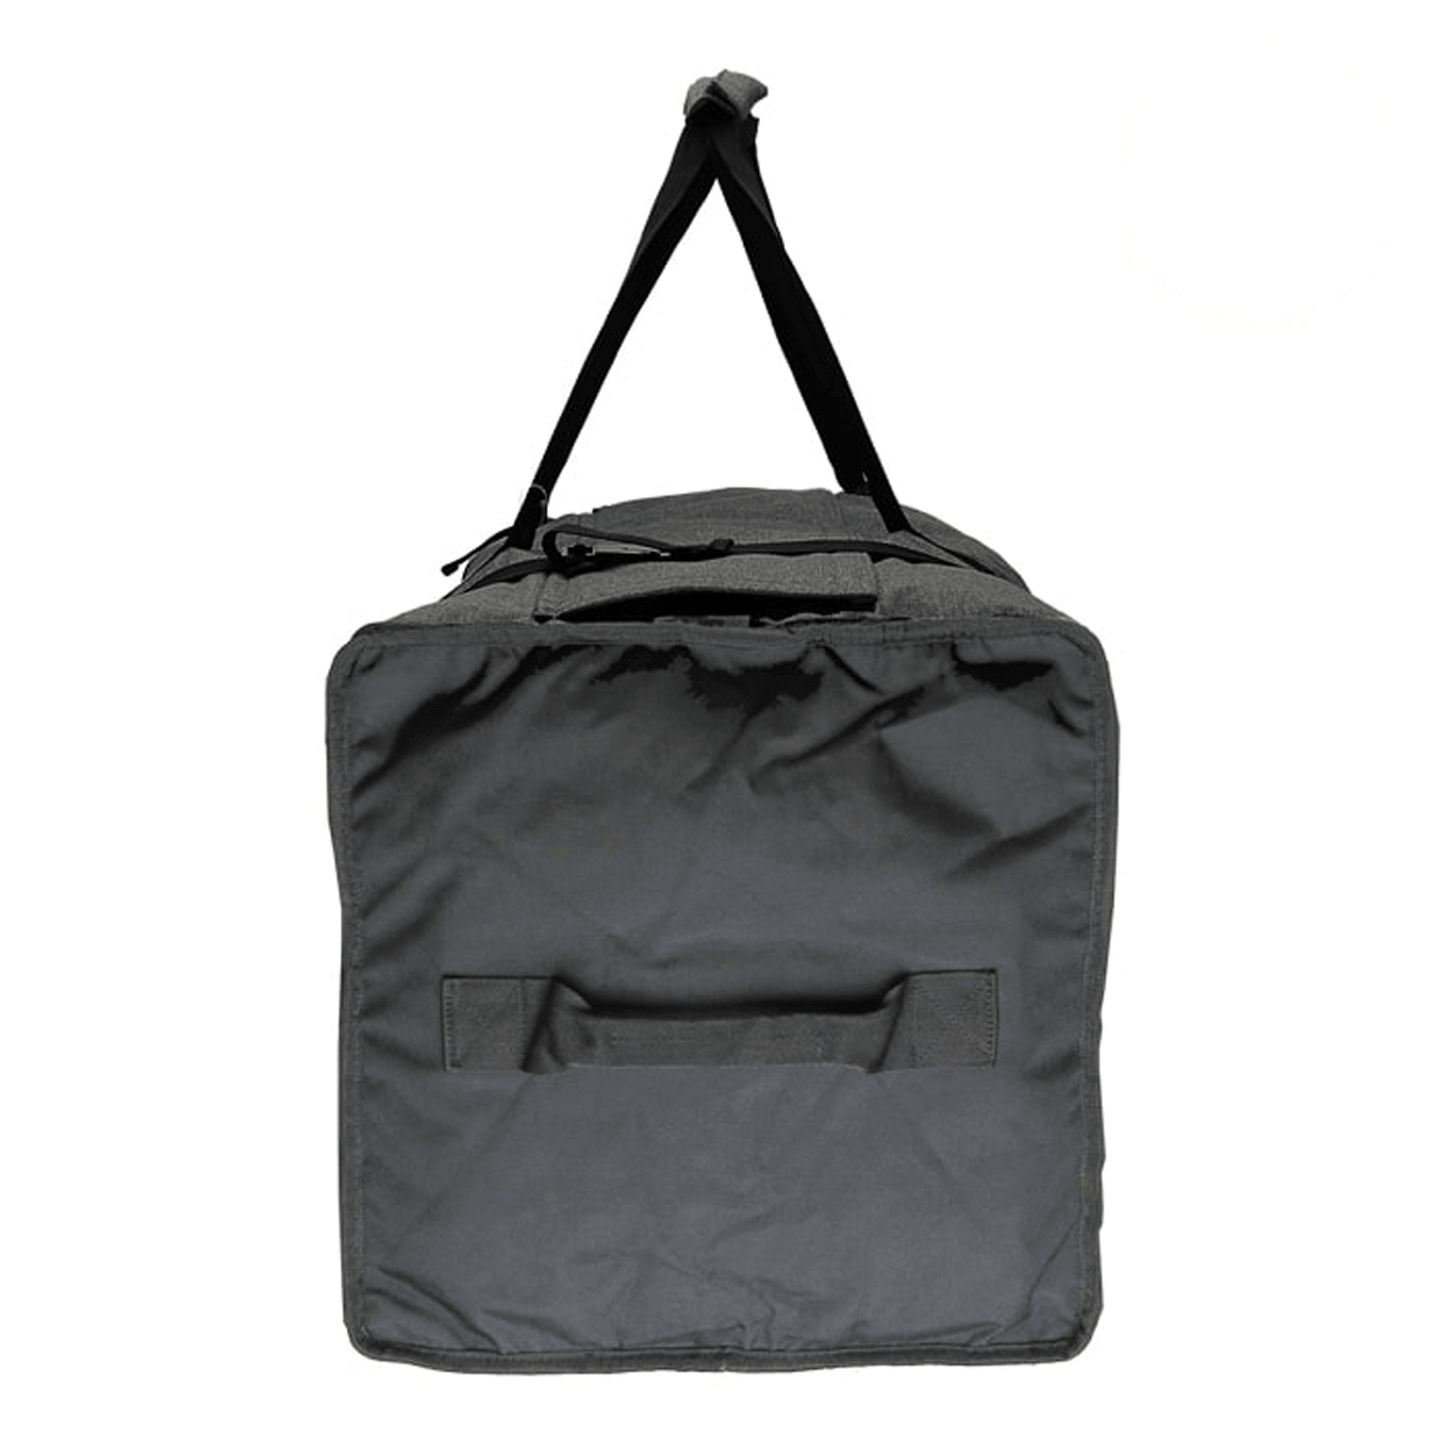 AWOL DAILY XX-Large Black Square Bag 886163 Harvest & Extraction 853336007942